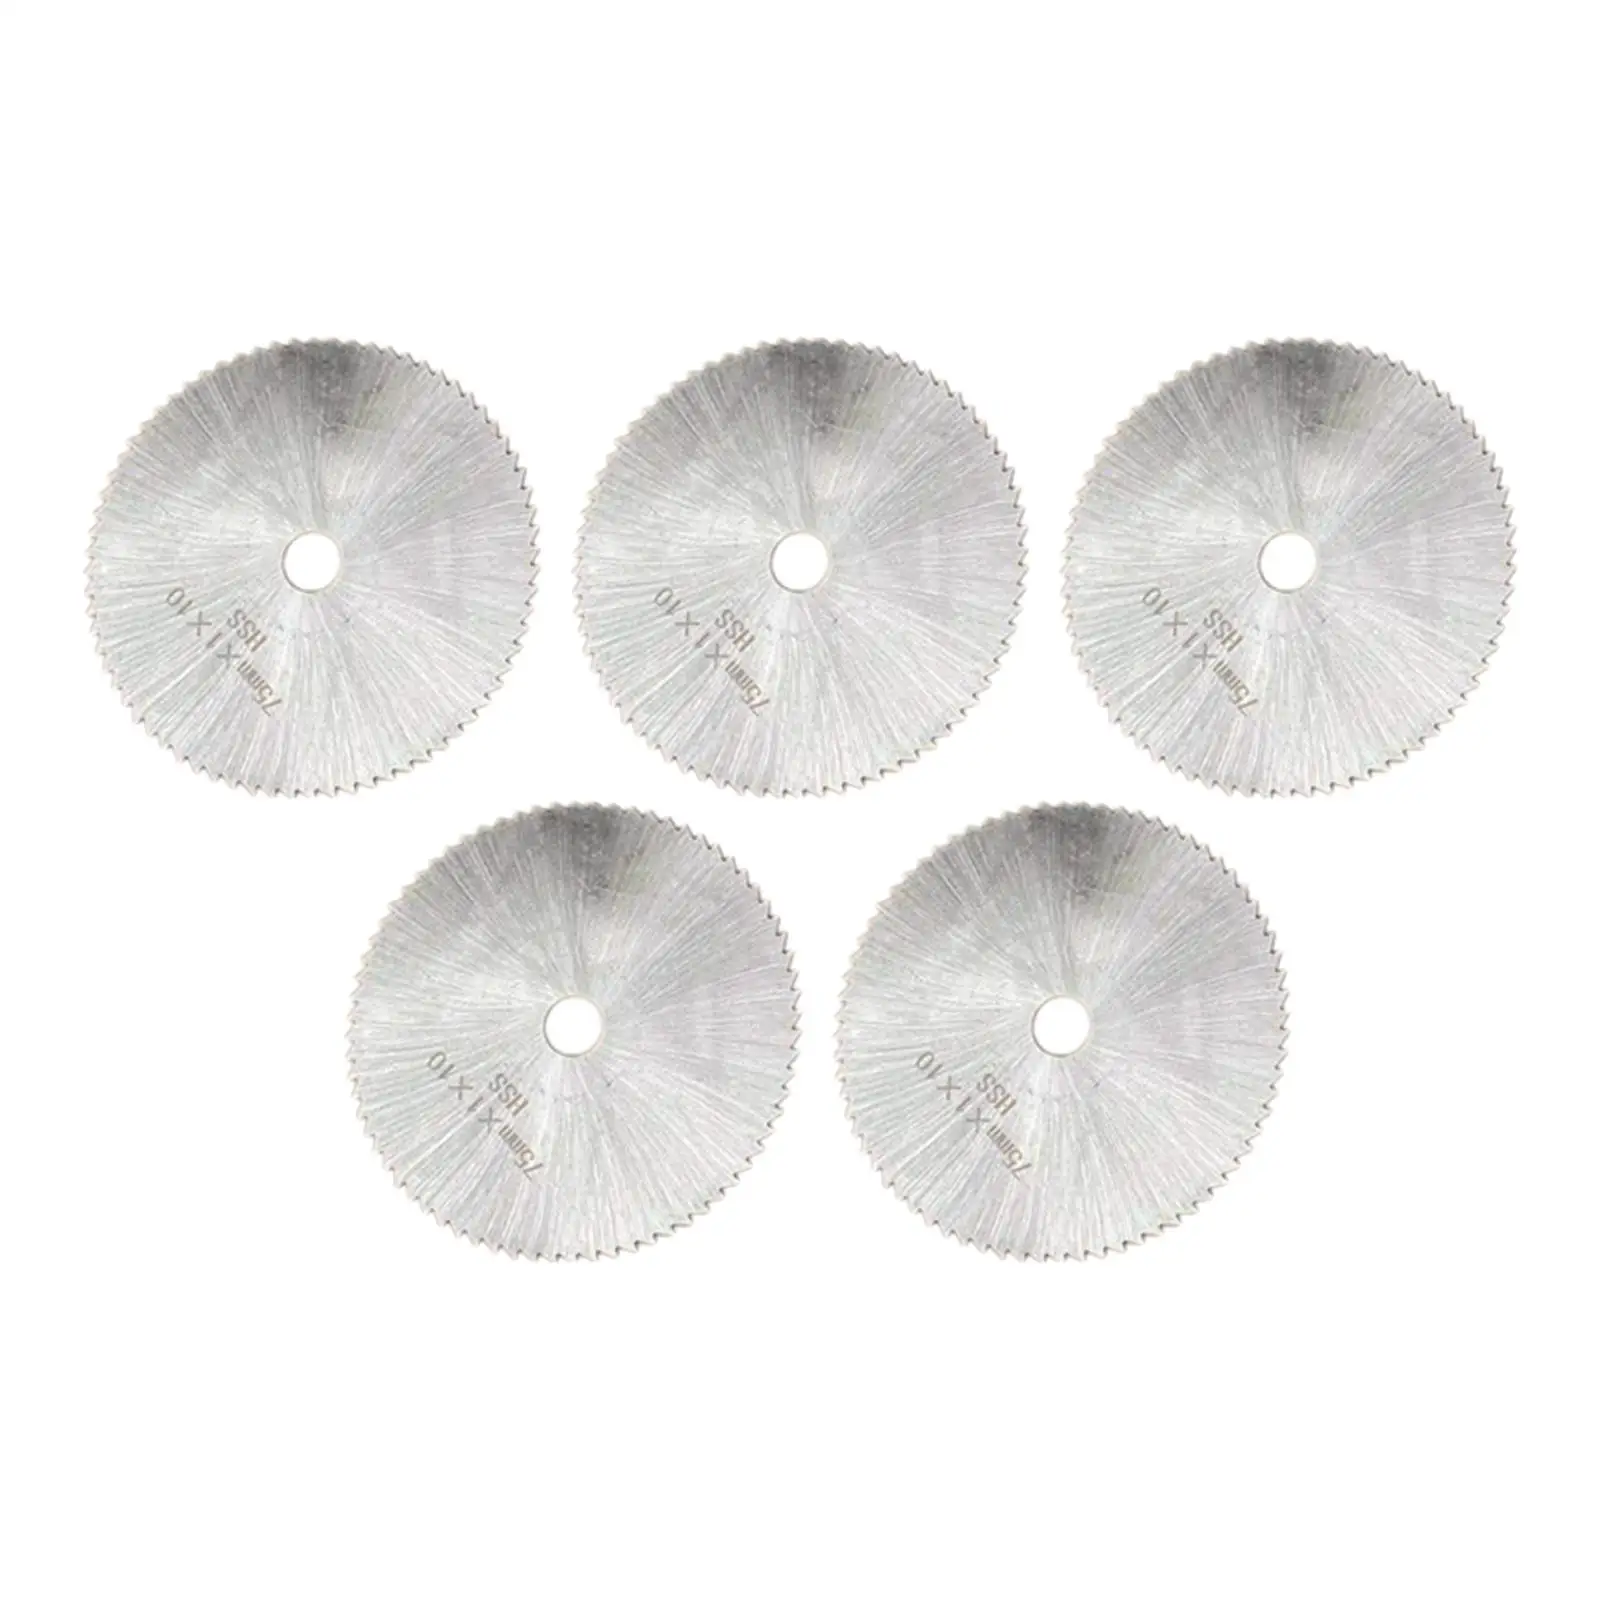 5 Pieces Cutting Disc Wheel Multi Functional Polishing Disc Tile Tool Rotary Tool Cutting Wheels for Granite Attachment Brick